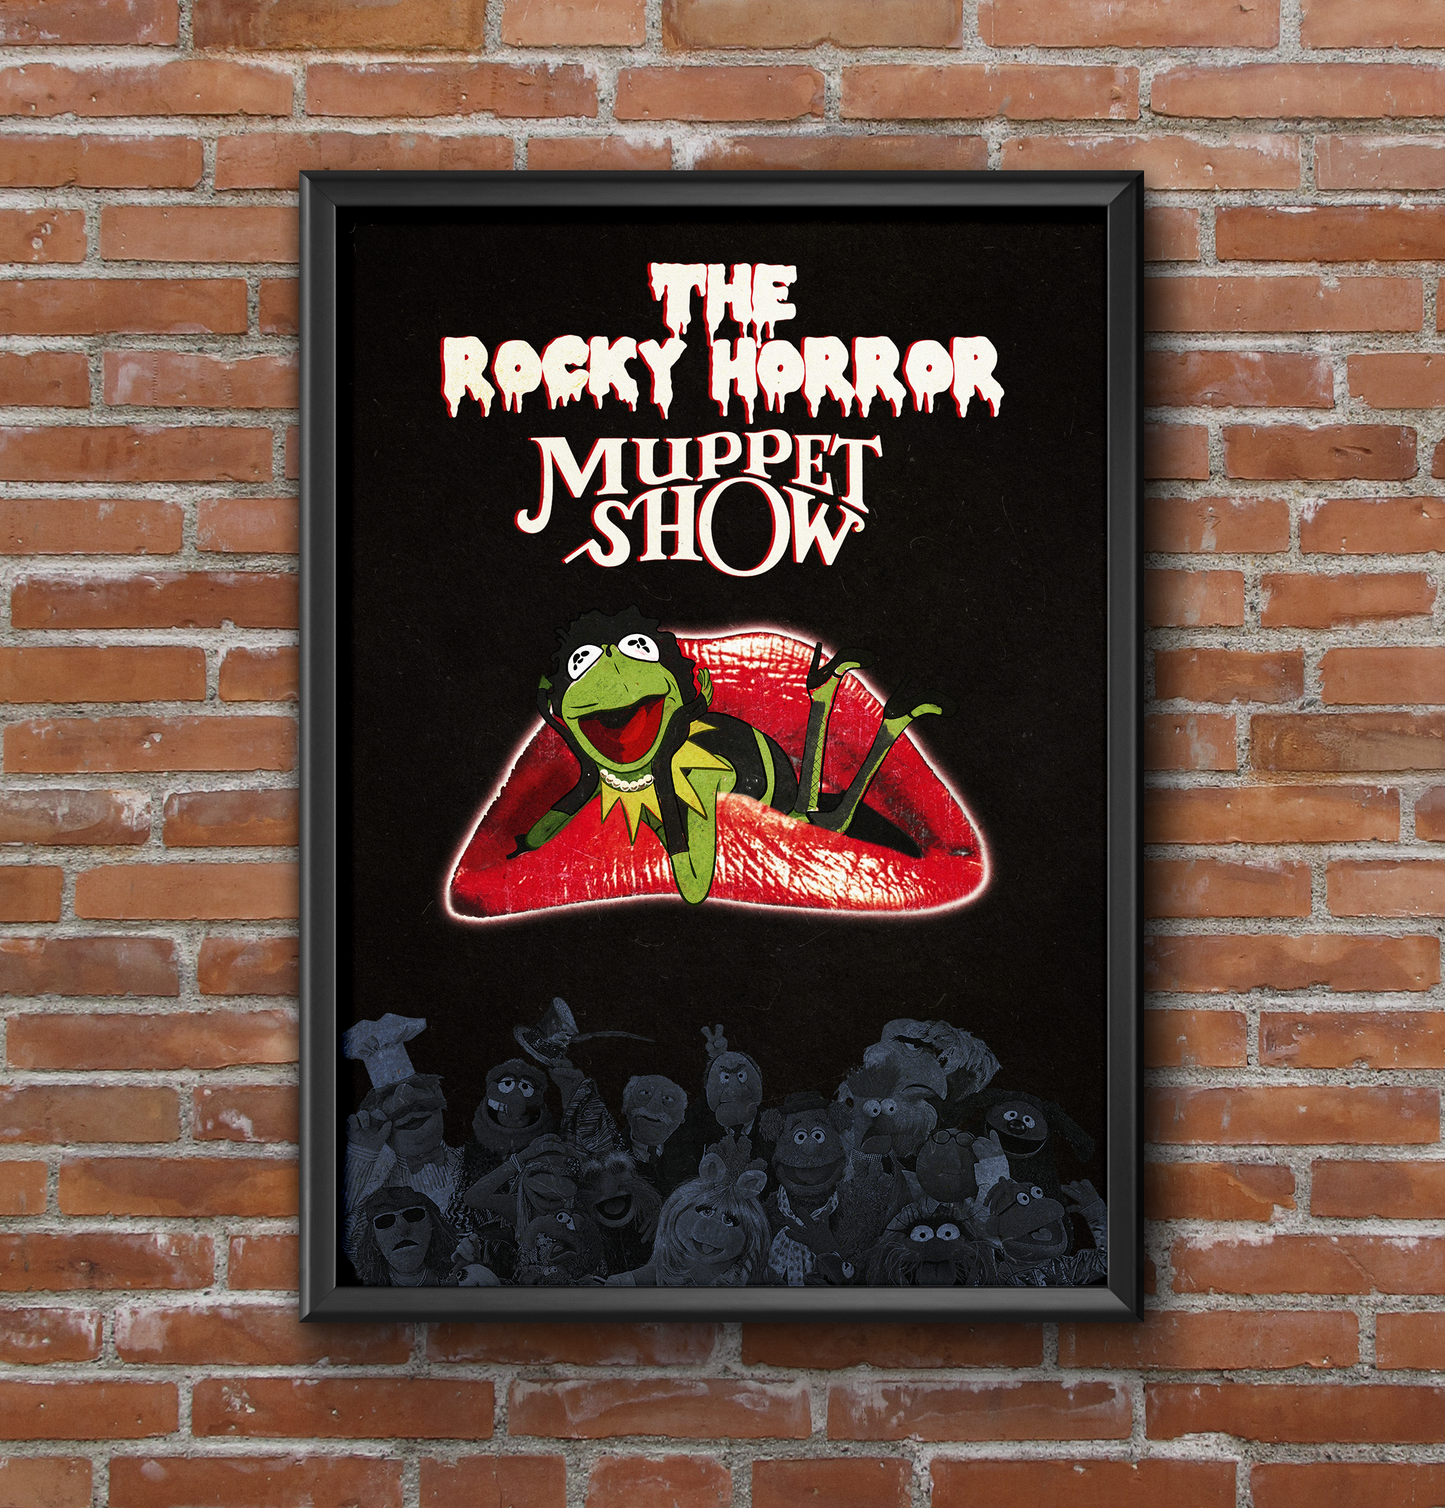 The Rocky Horror Picture Show - The Muppet Show Movie Parody Poster with Kermit